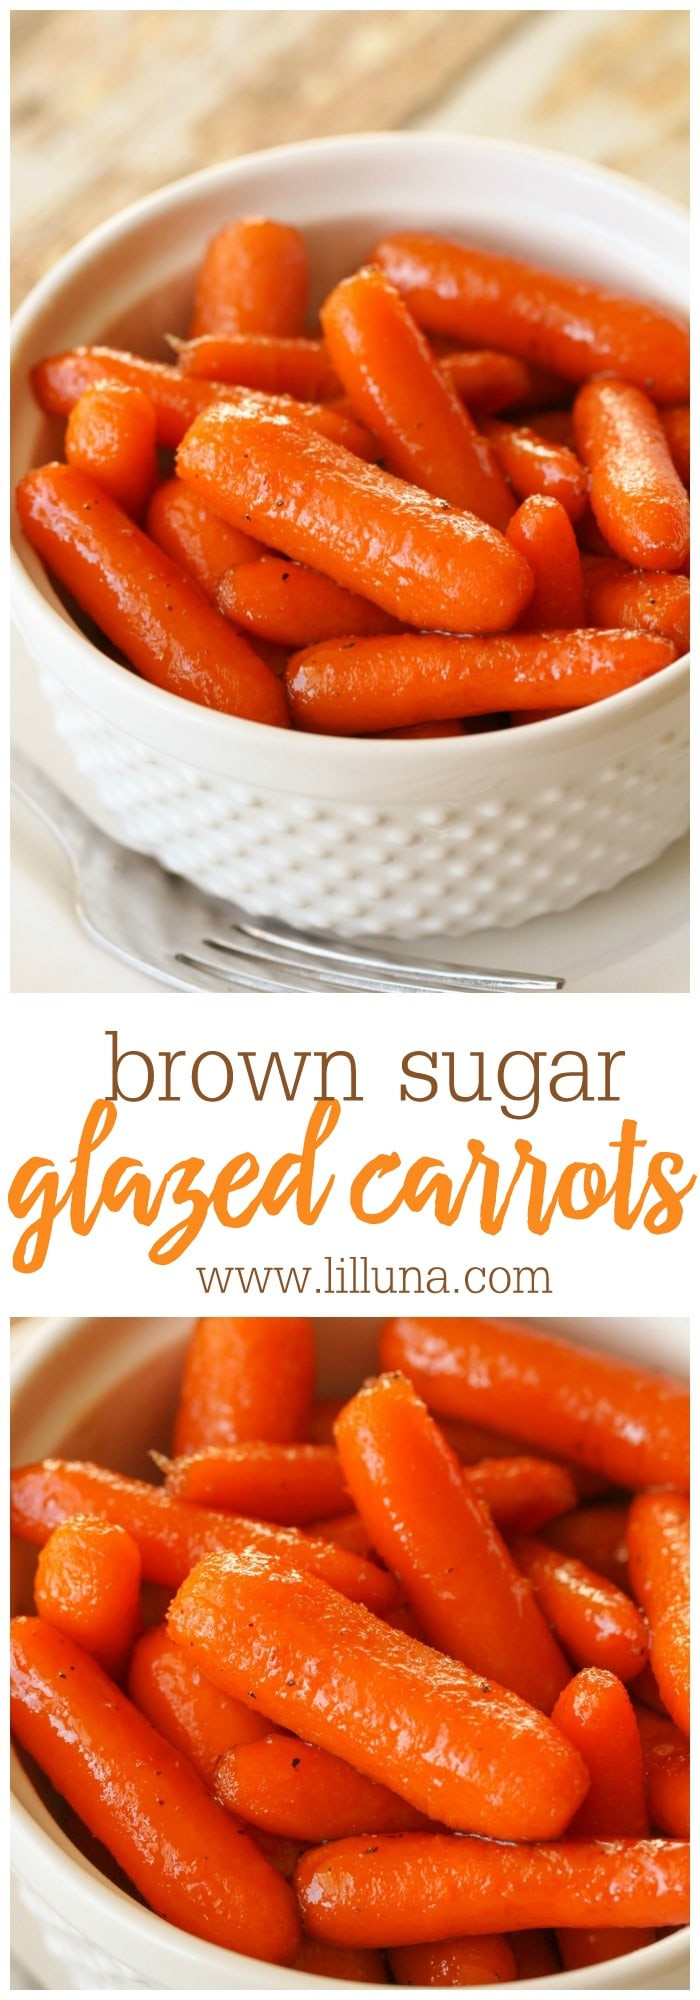 Baby Food Recipe Carrots
 Brown Sugar Glazed Carrots Recipe the Perfect Side Dish